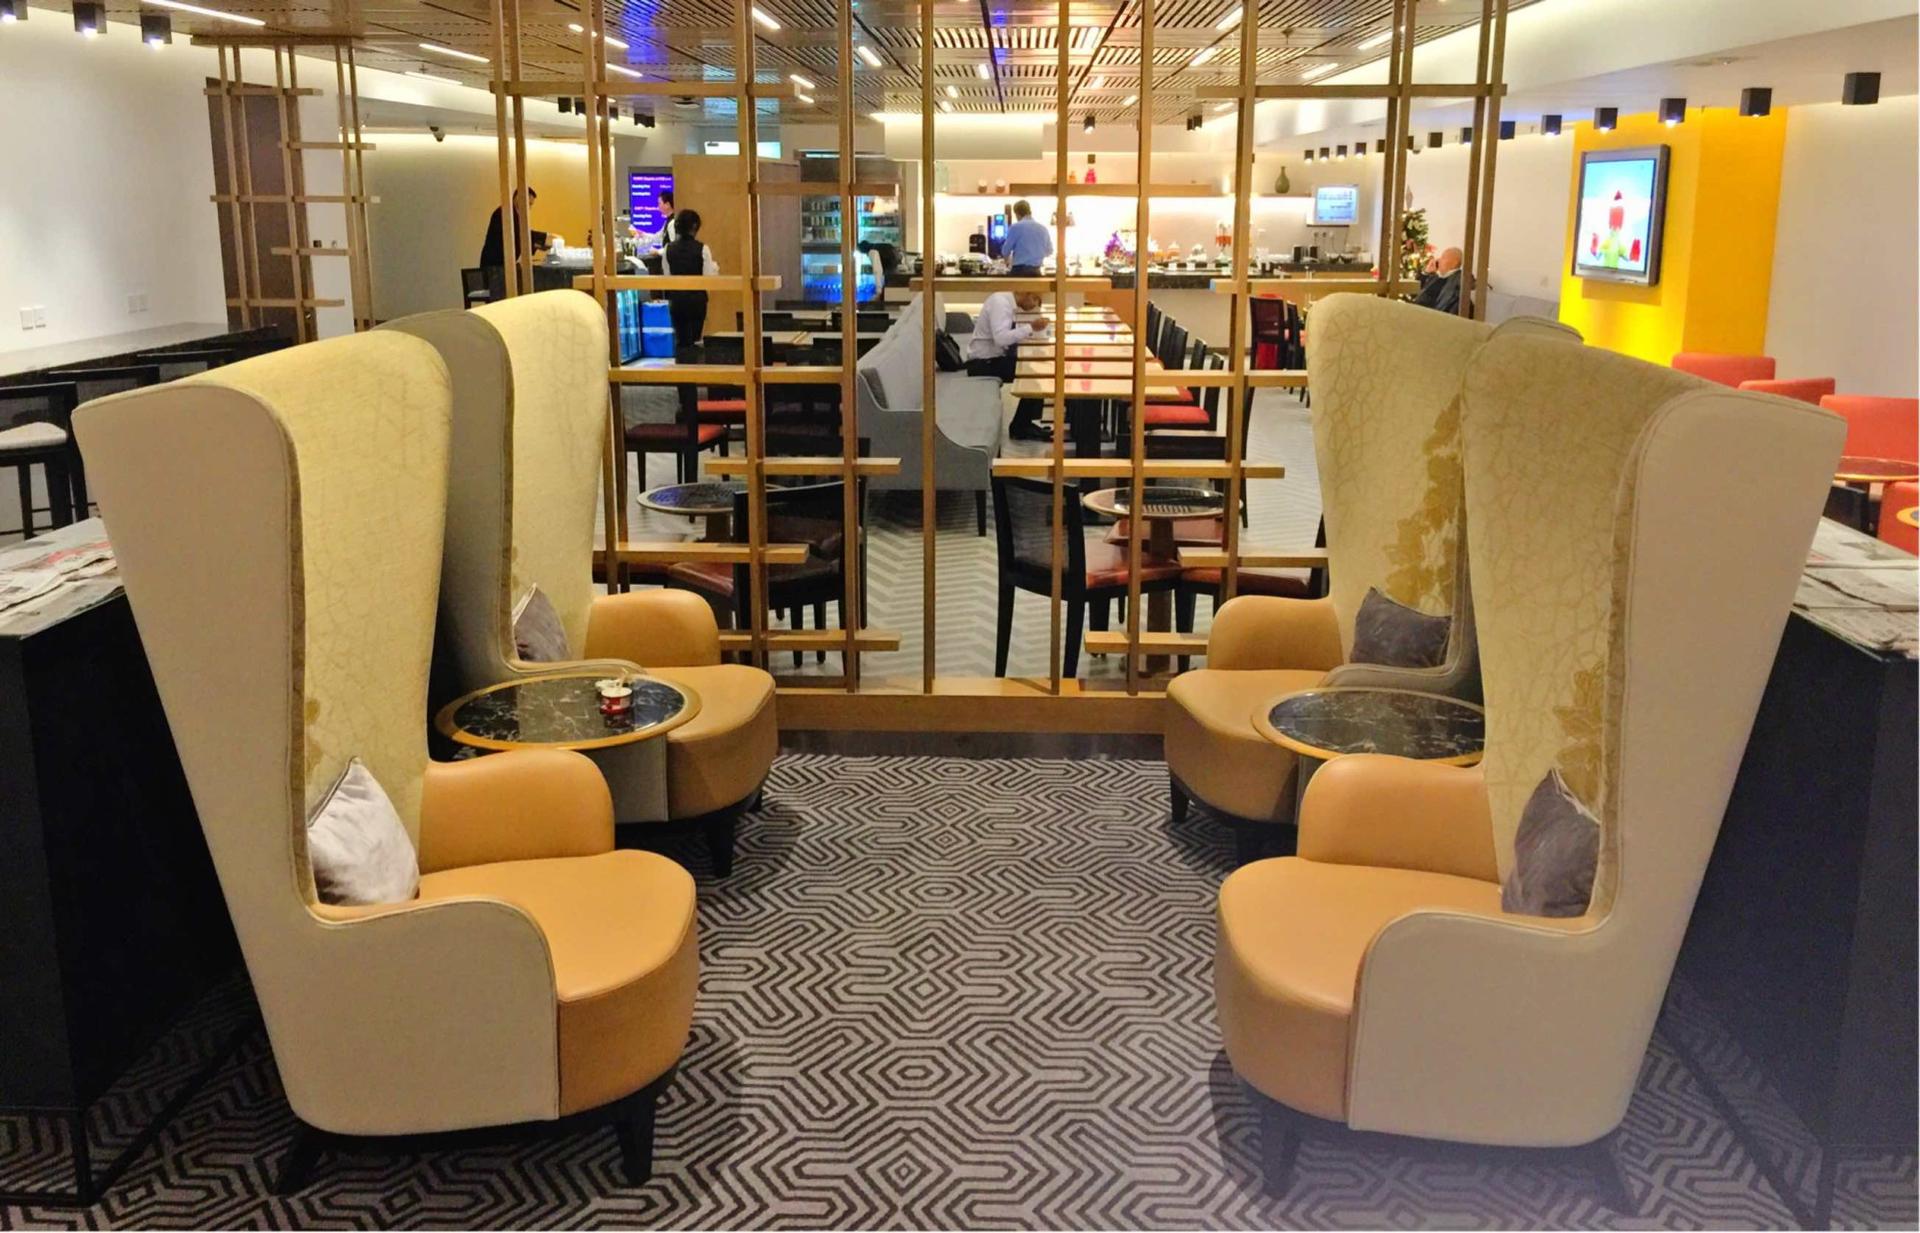 Singapore Airlines SilverKris Business Class Lounge image 9 of 68